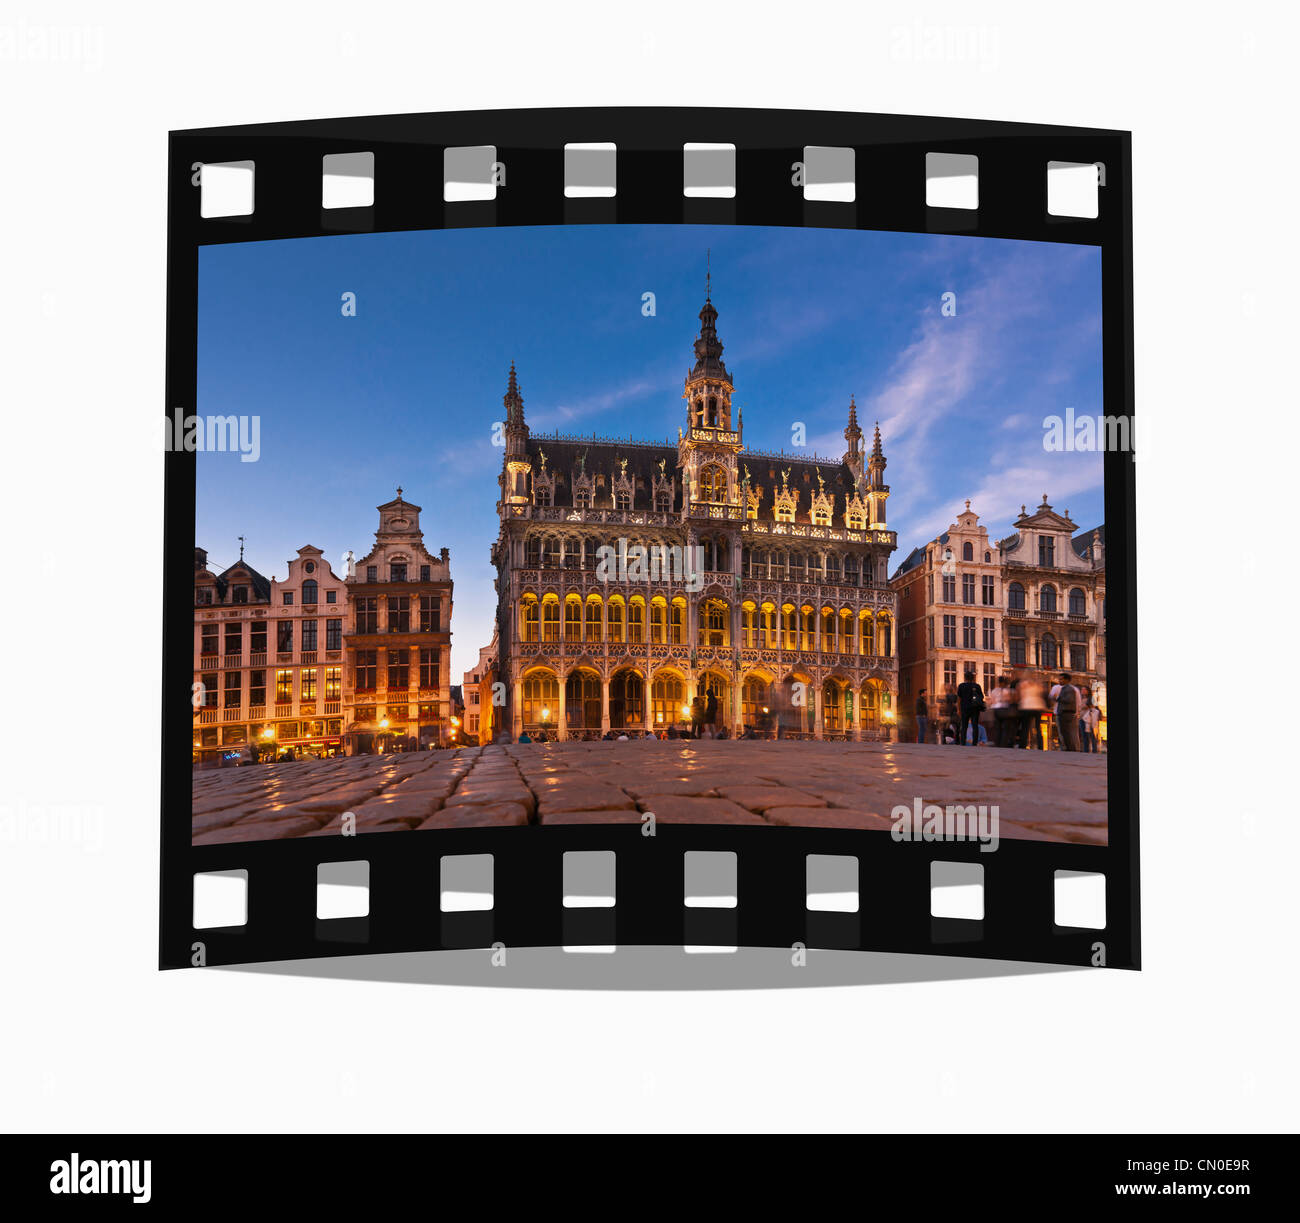 Filmstrip: Grand Place, market square with baroque guild houses and Kings house, Brussels, Belgium, Europe Stock Photo